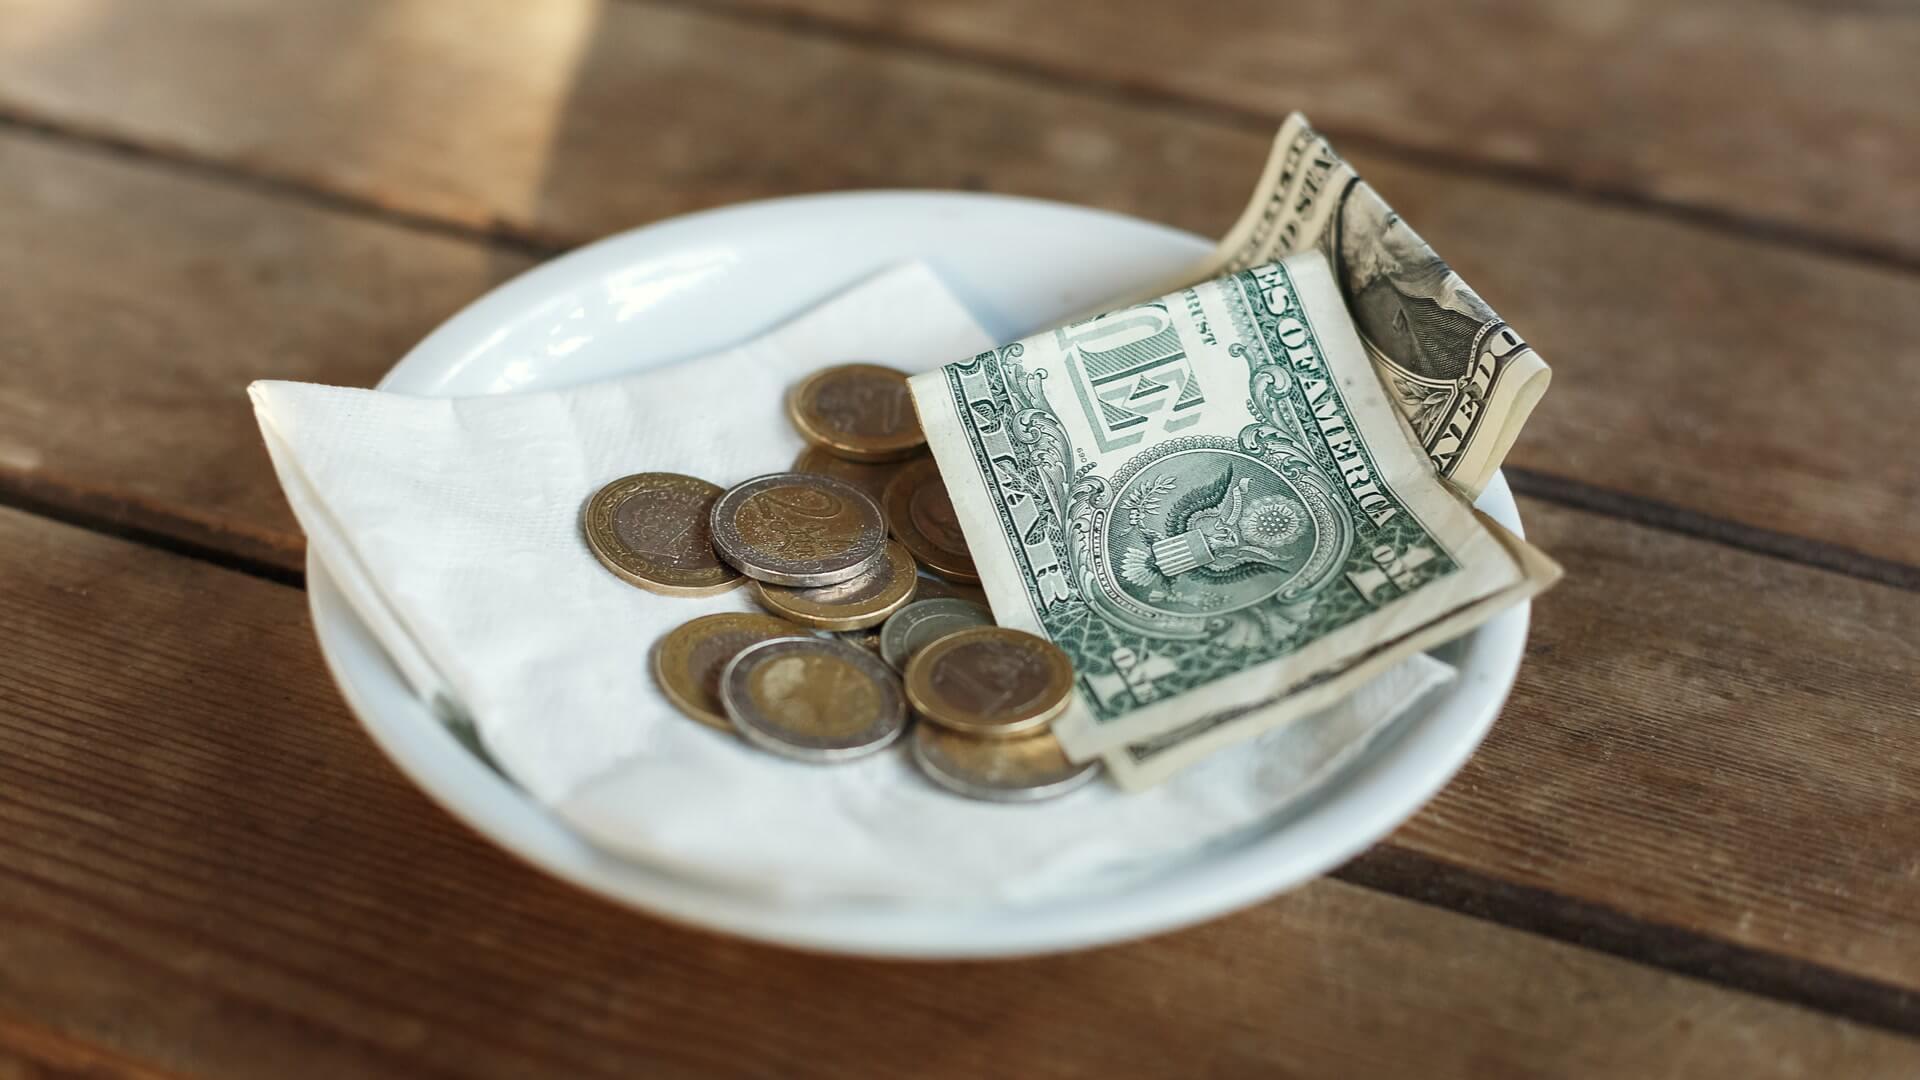 Tipping Etiquette: If You’re Broke, What’s the Right Amount To Give?